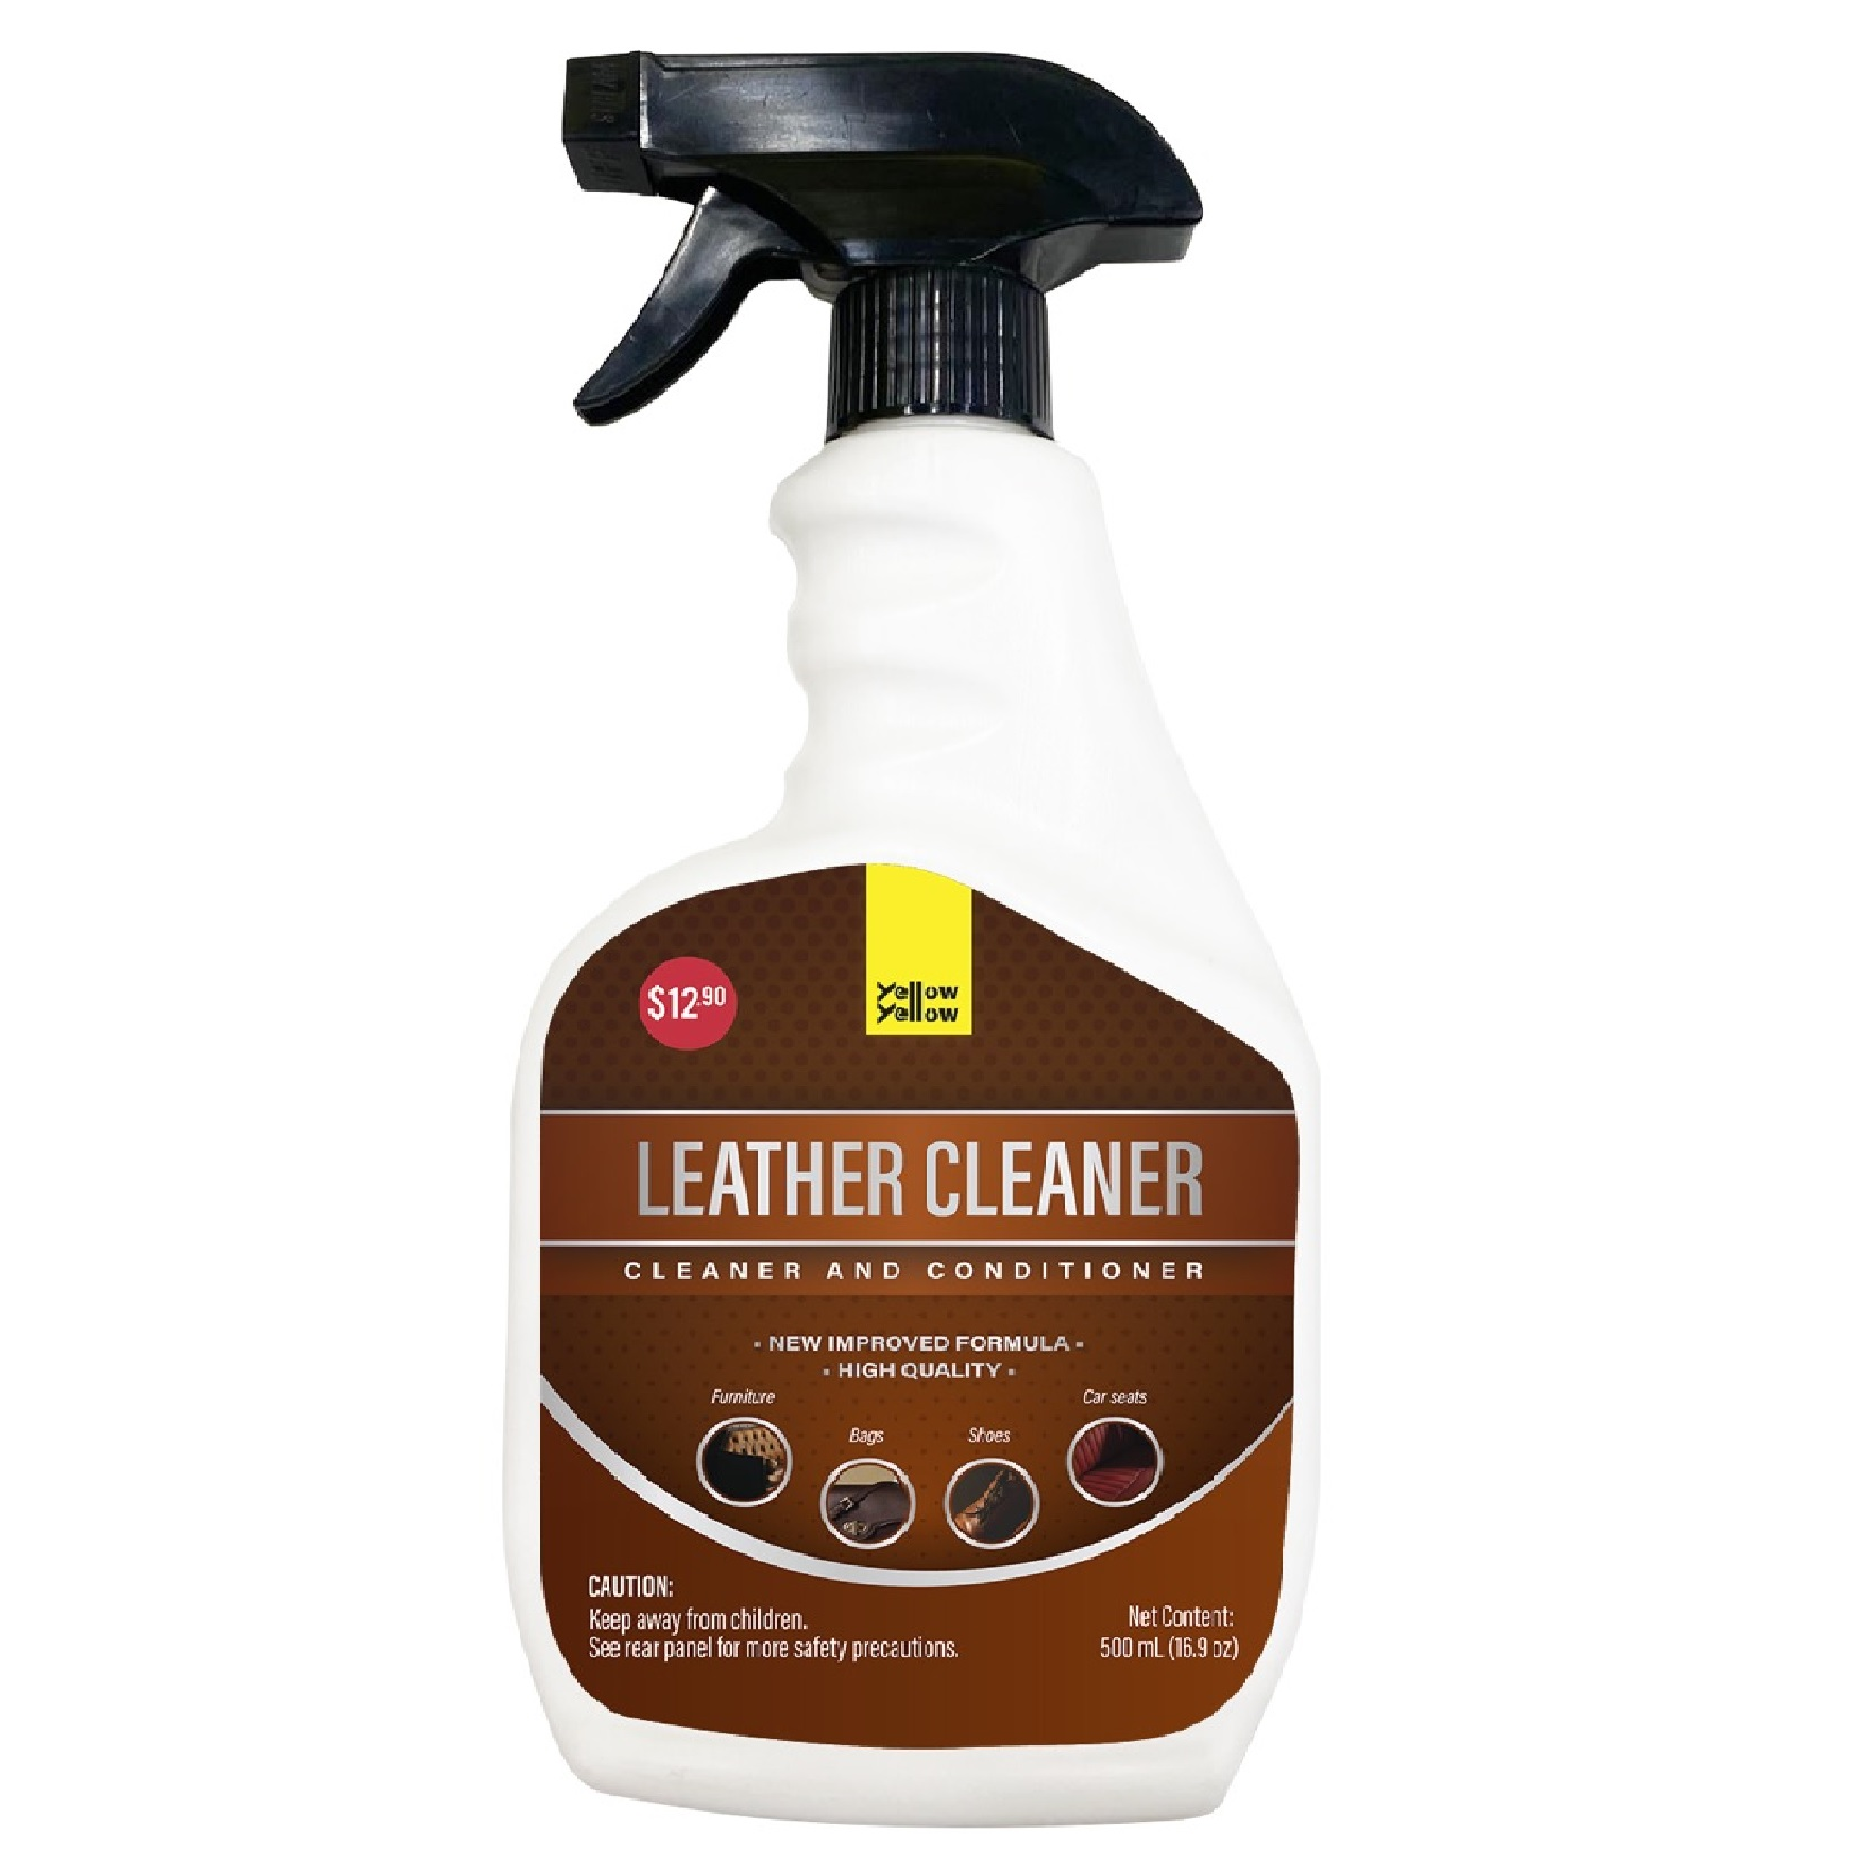 Yellowyellow HC-198 TOP SELLER Leather Cleaner & Conditioner 500ML